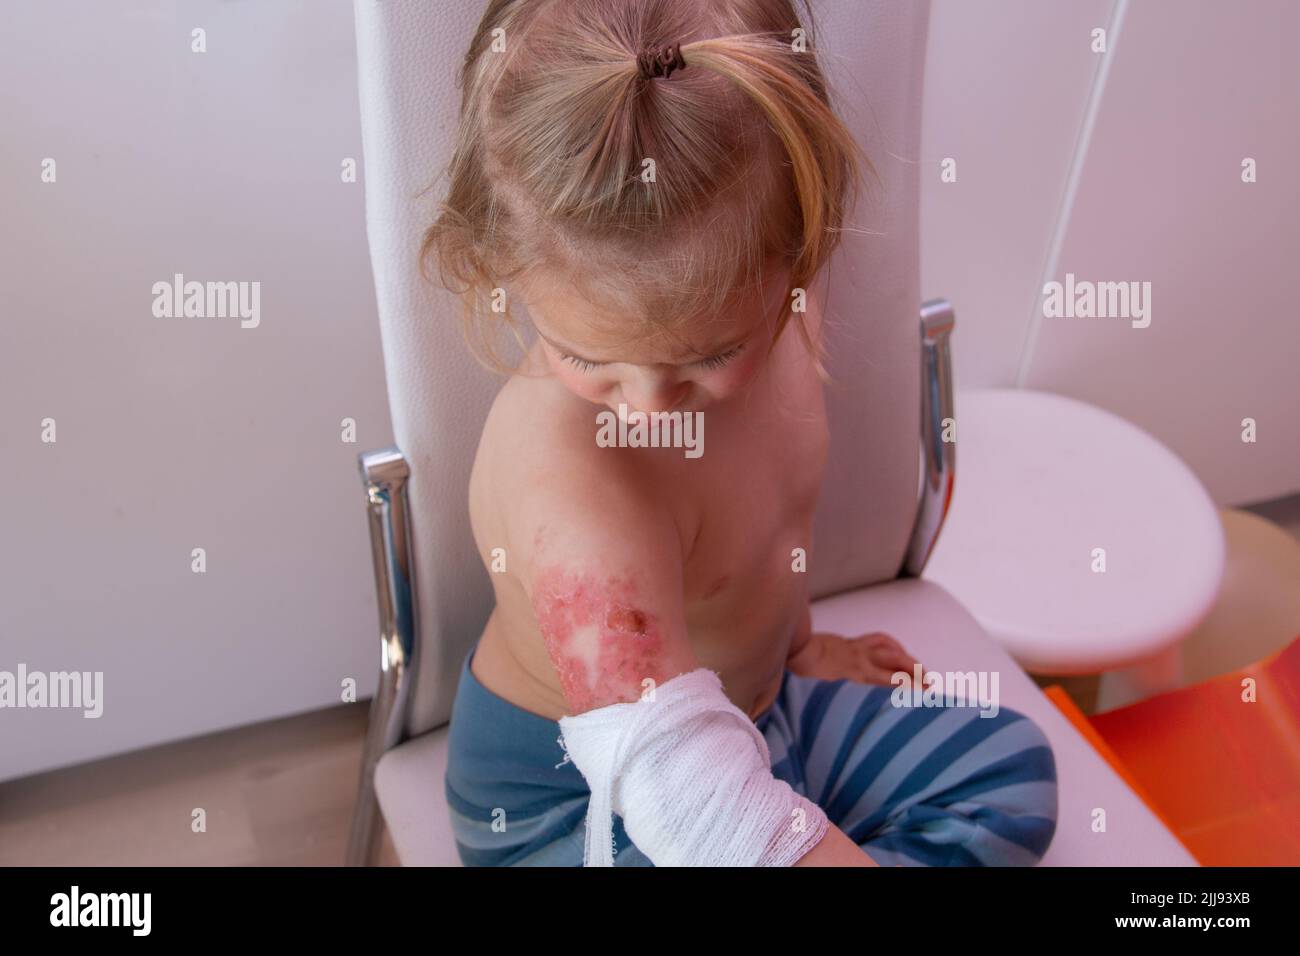 Toddler with burned wound on arm, children accidents, pediatric burns and scalds Stock Photo